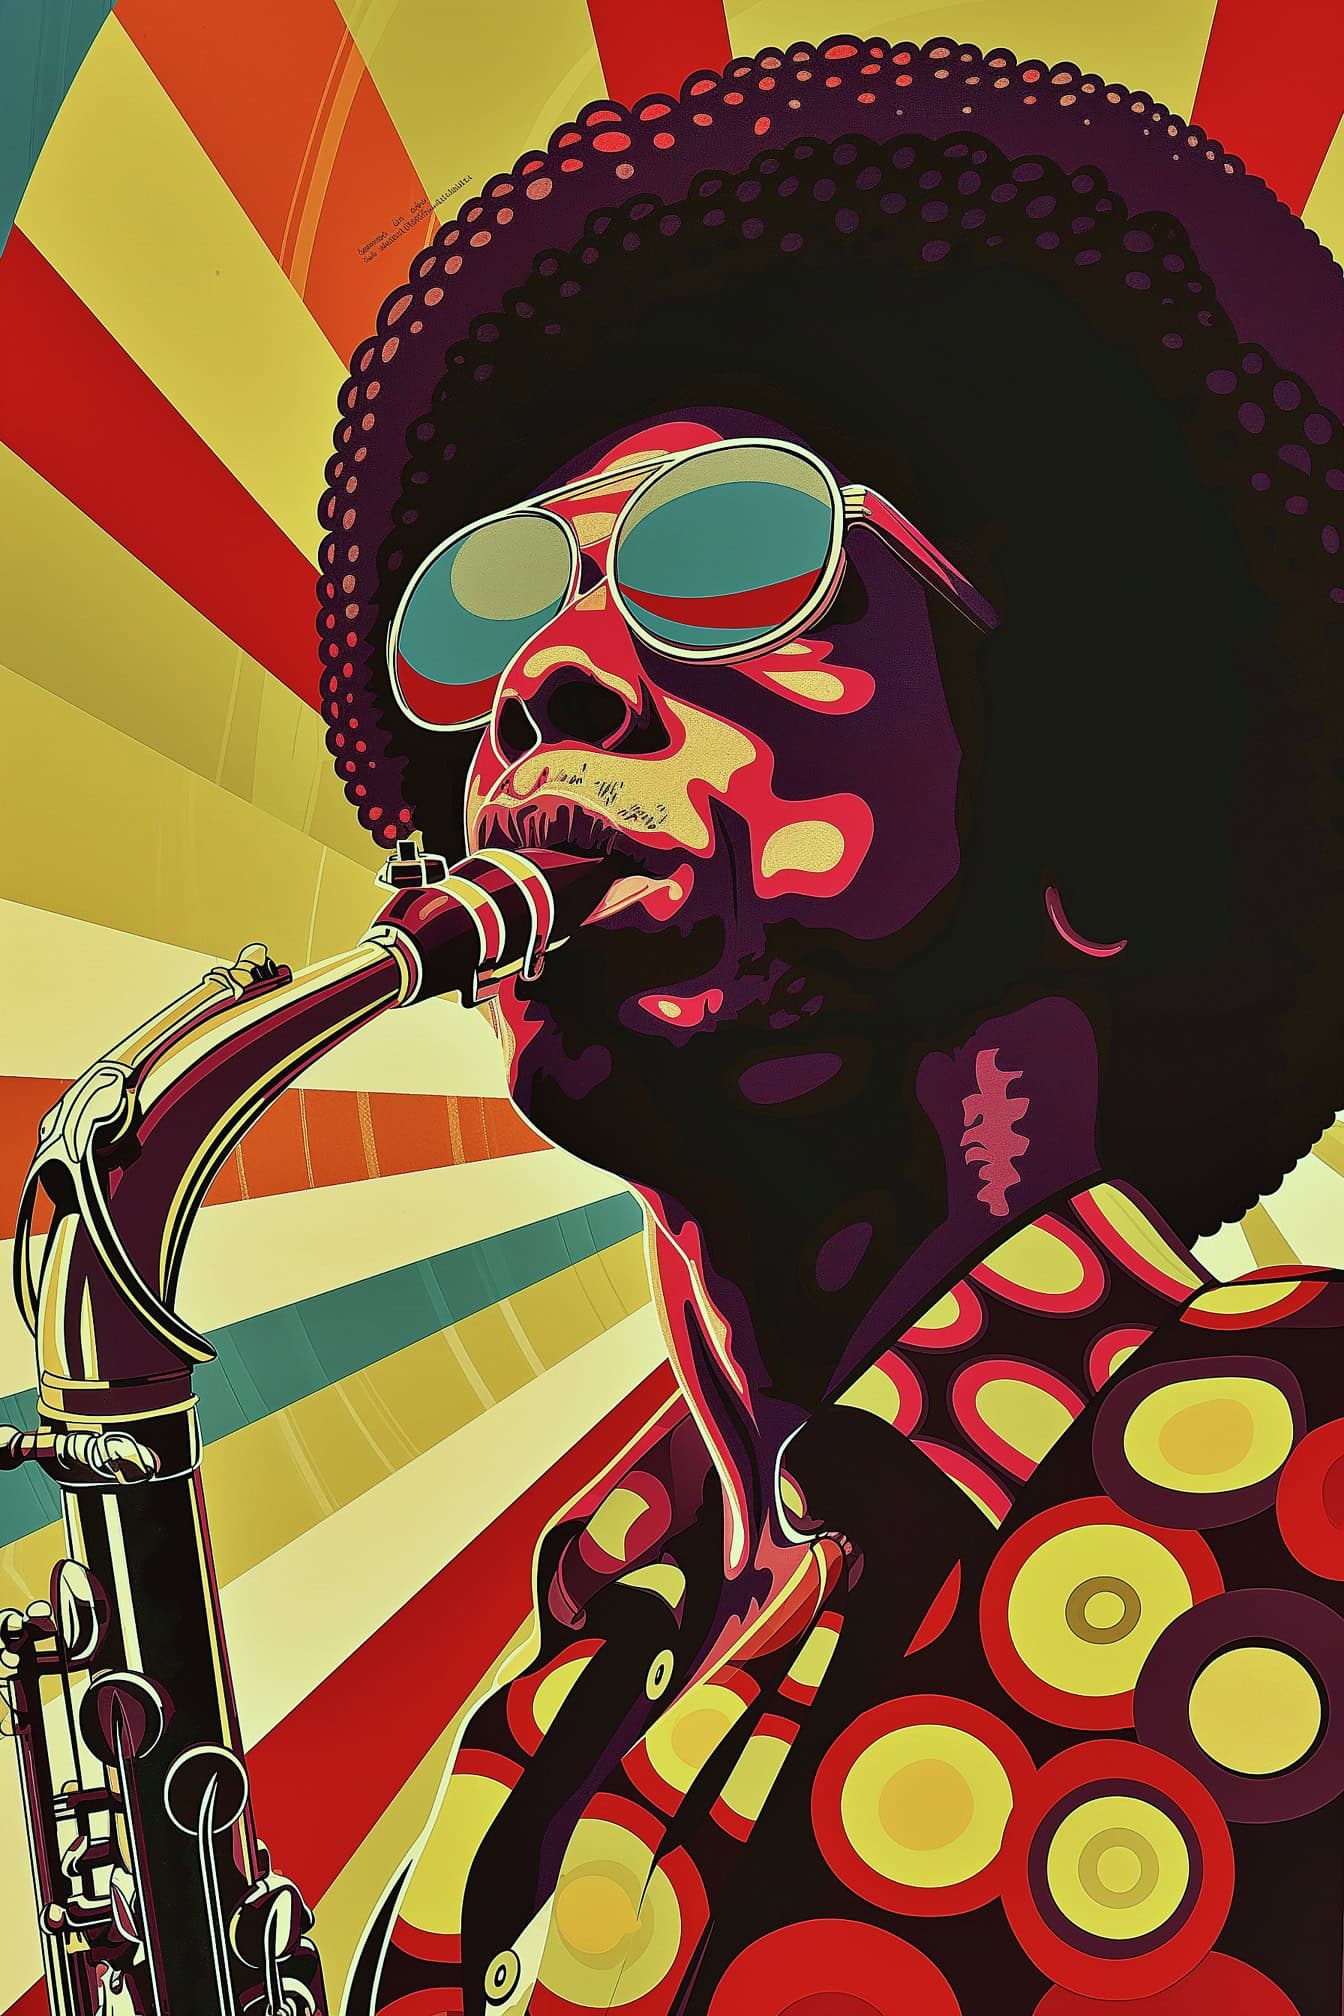 A retro-style poster of an African-American jazz musician with an Afro haircut wearing sunglasses and playing the saxophone